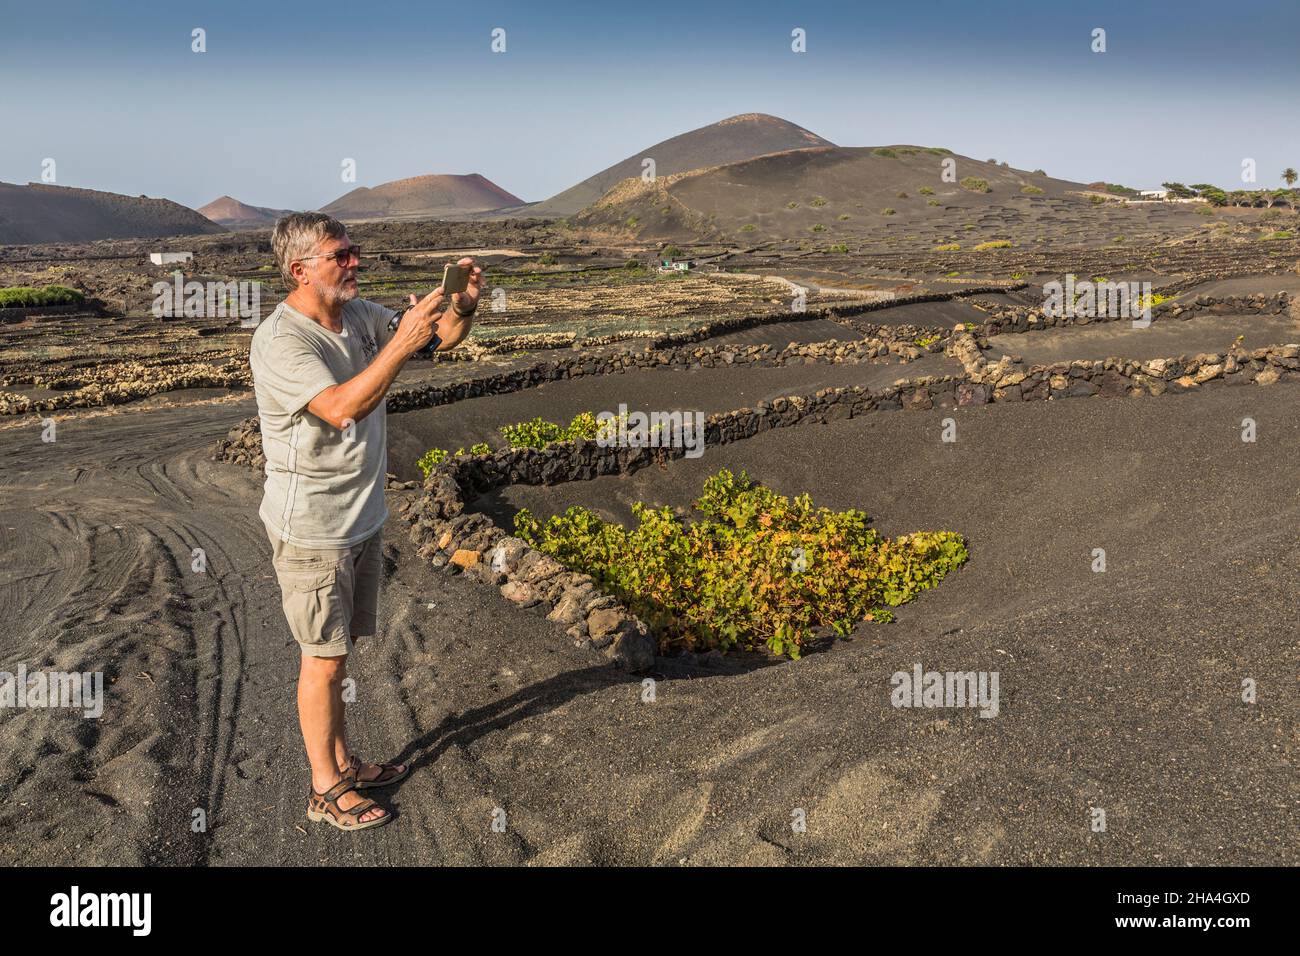 63 year old man photographs the vines with his smartphone,viticulture,dry construction method,volcanic landscape near la geria,lanzarote,canary islands,spain,europe Stock Photo